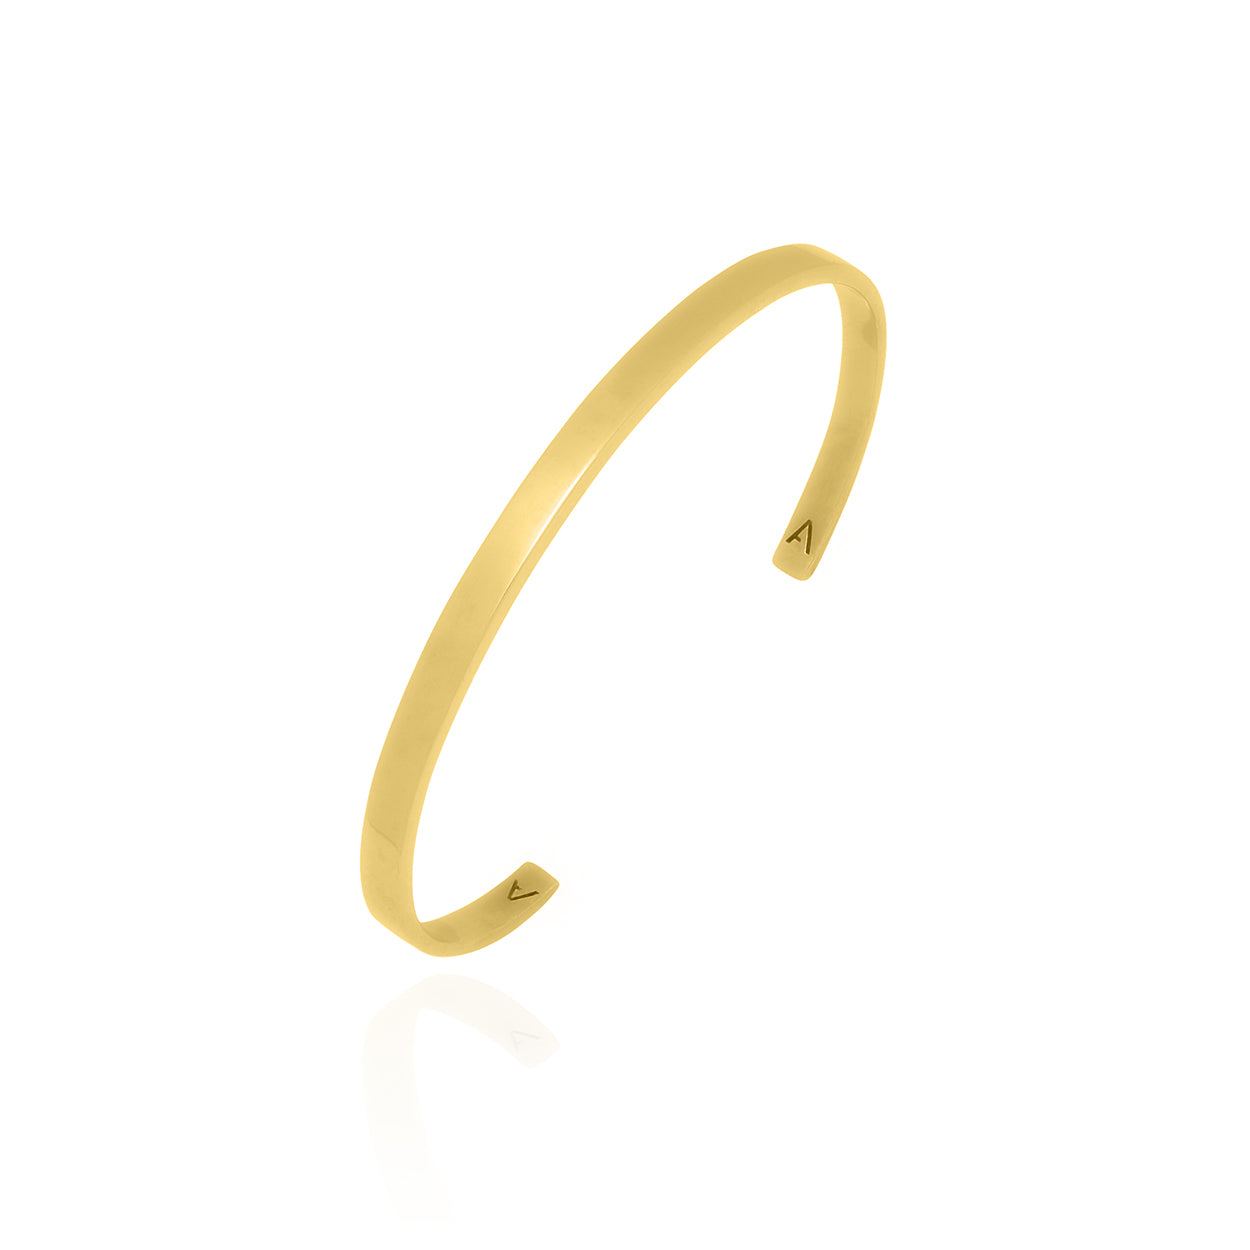 Solid Gold Avanti Bangle Silver plated Yellow